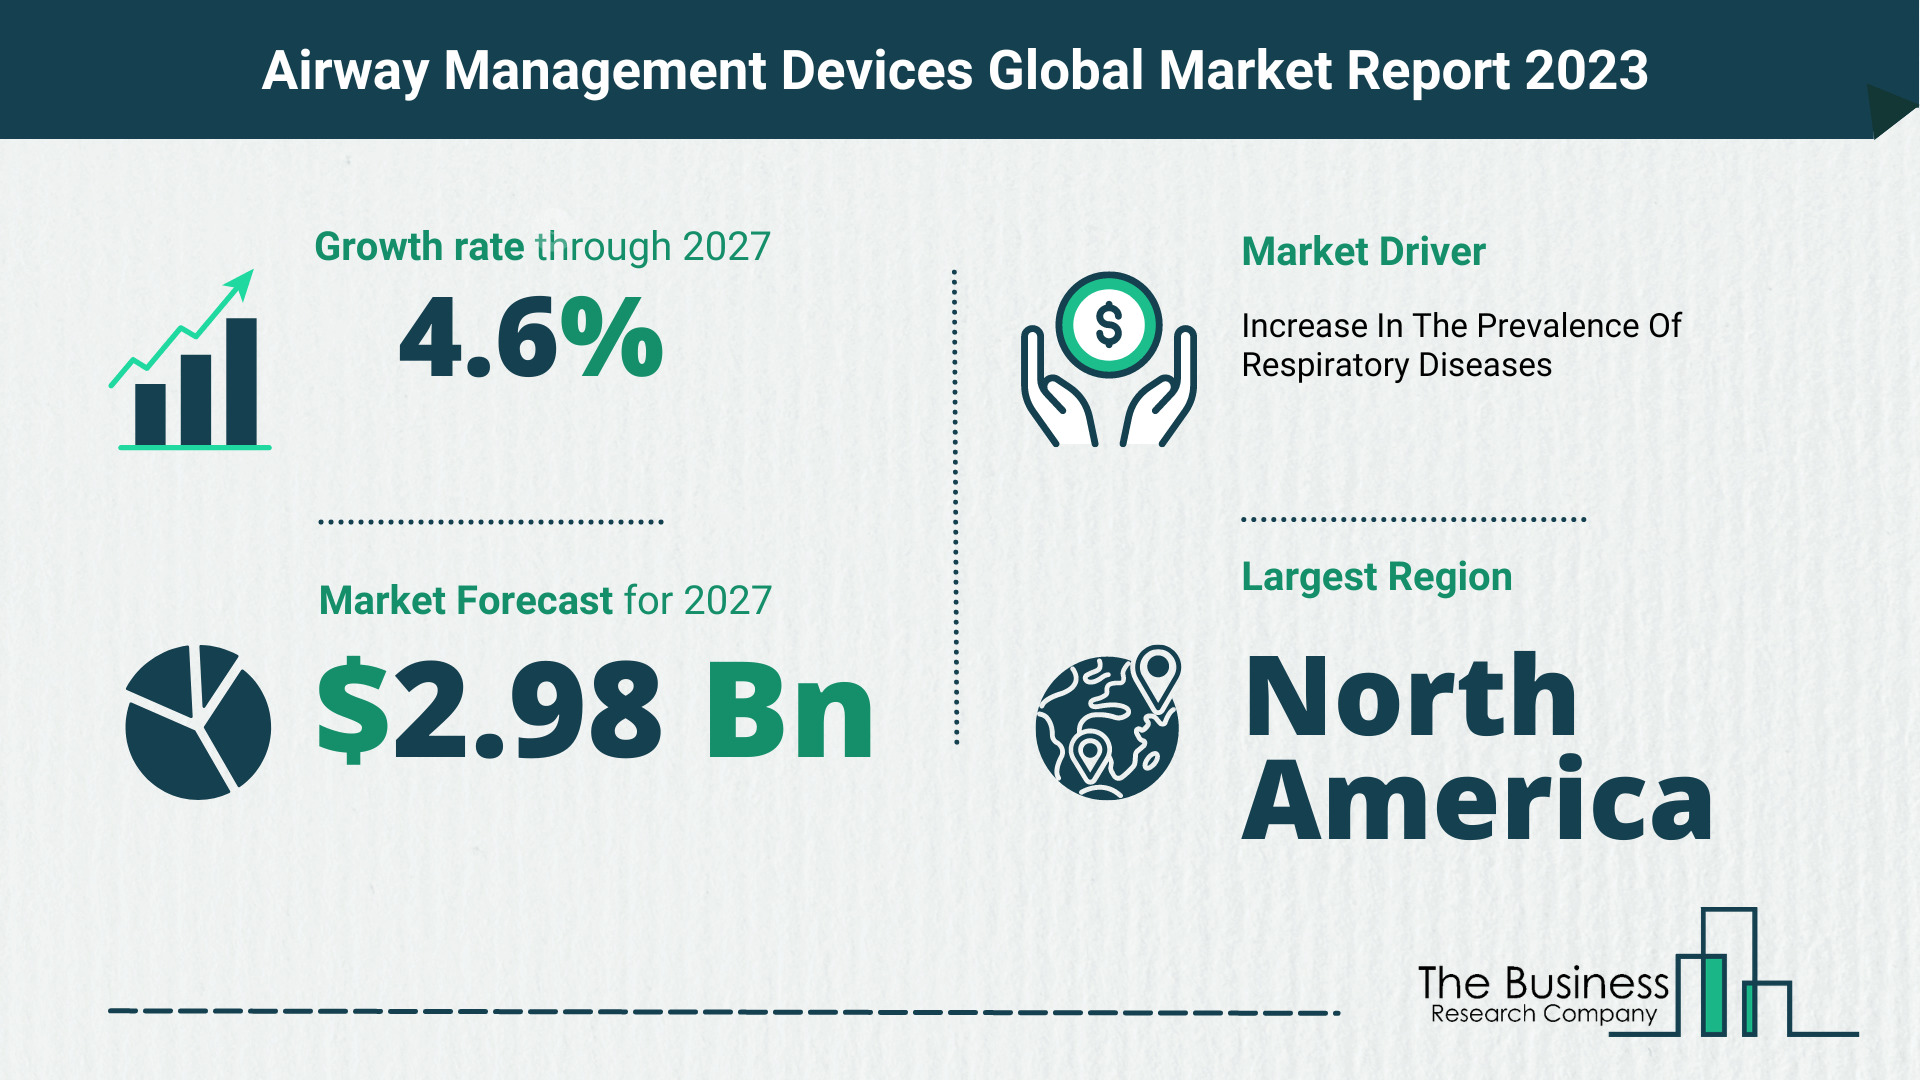 Global Airway Management Devices Market Opportunities And Strategies 2023